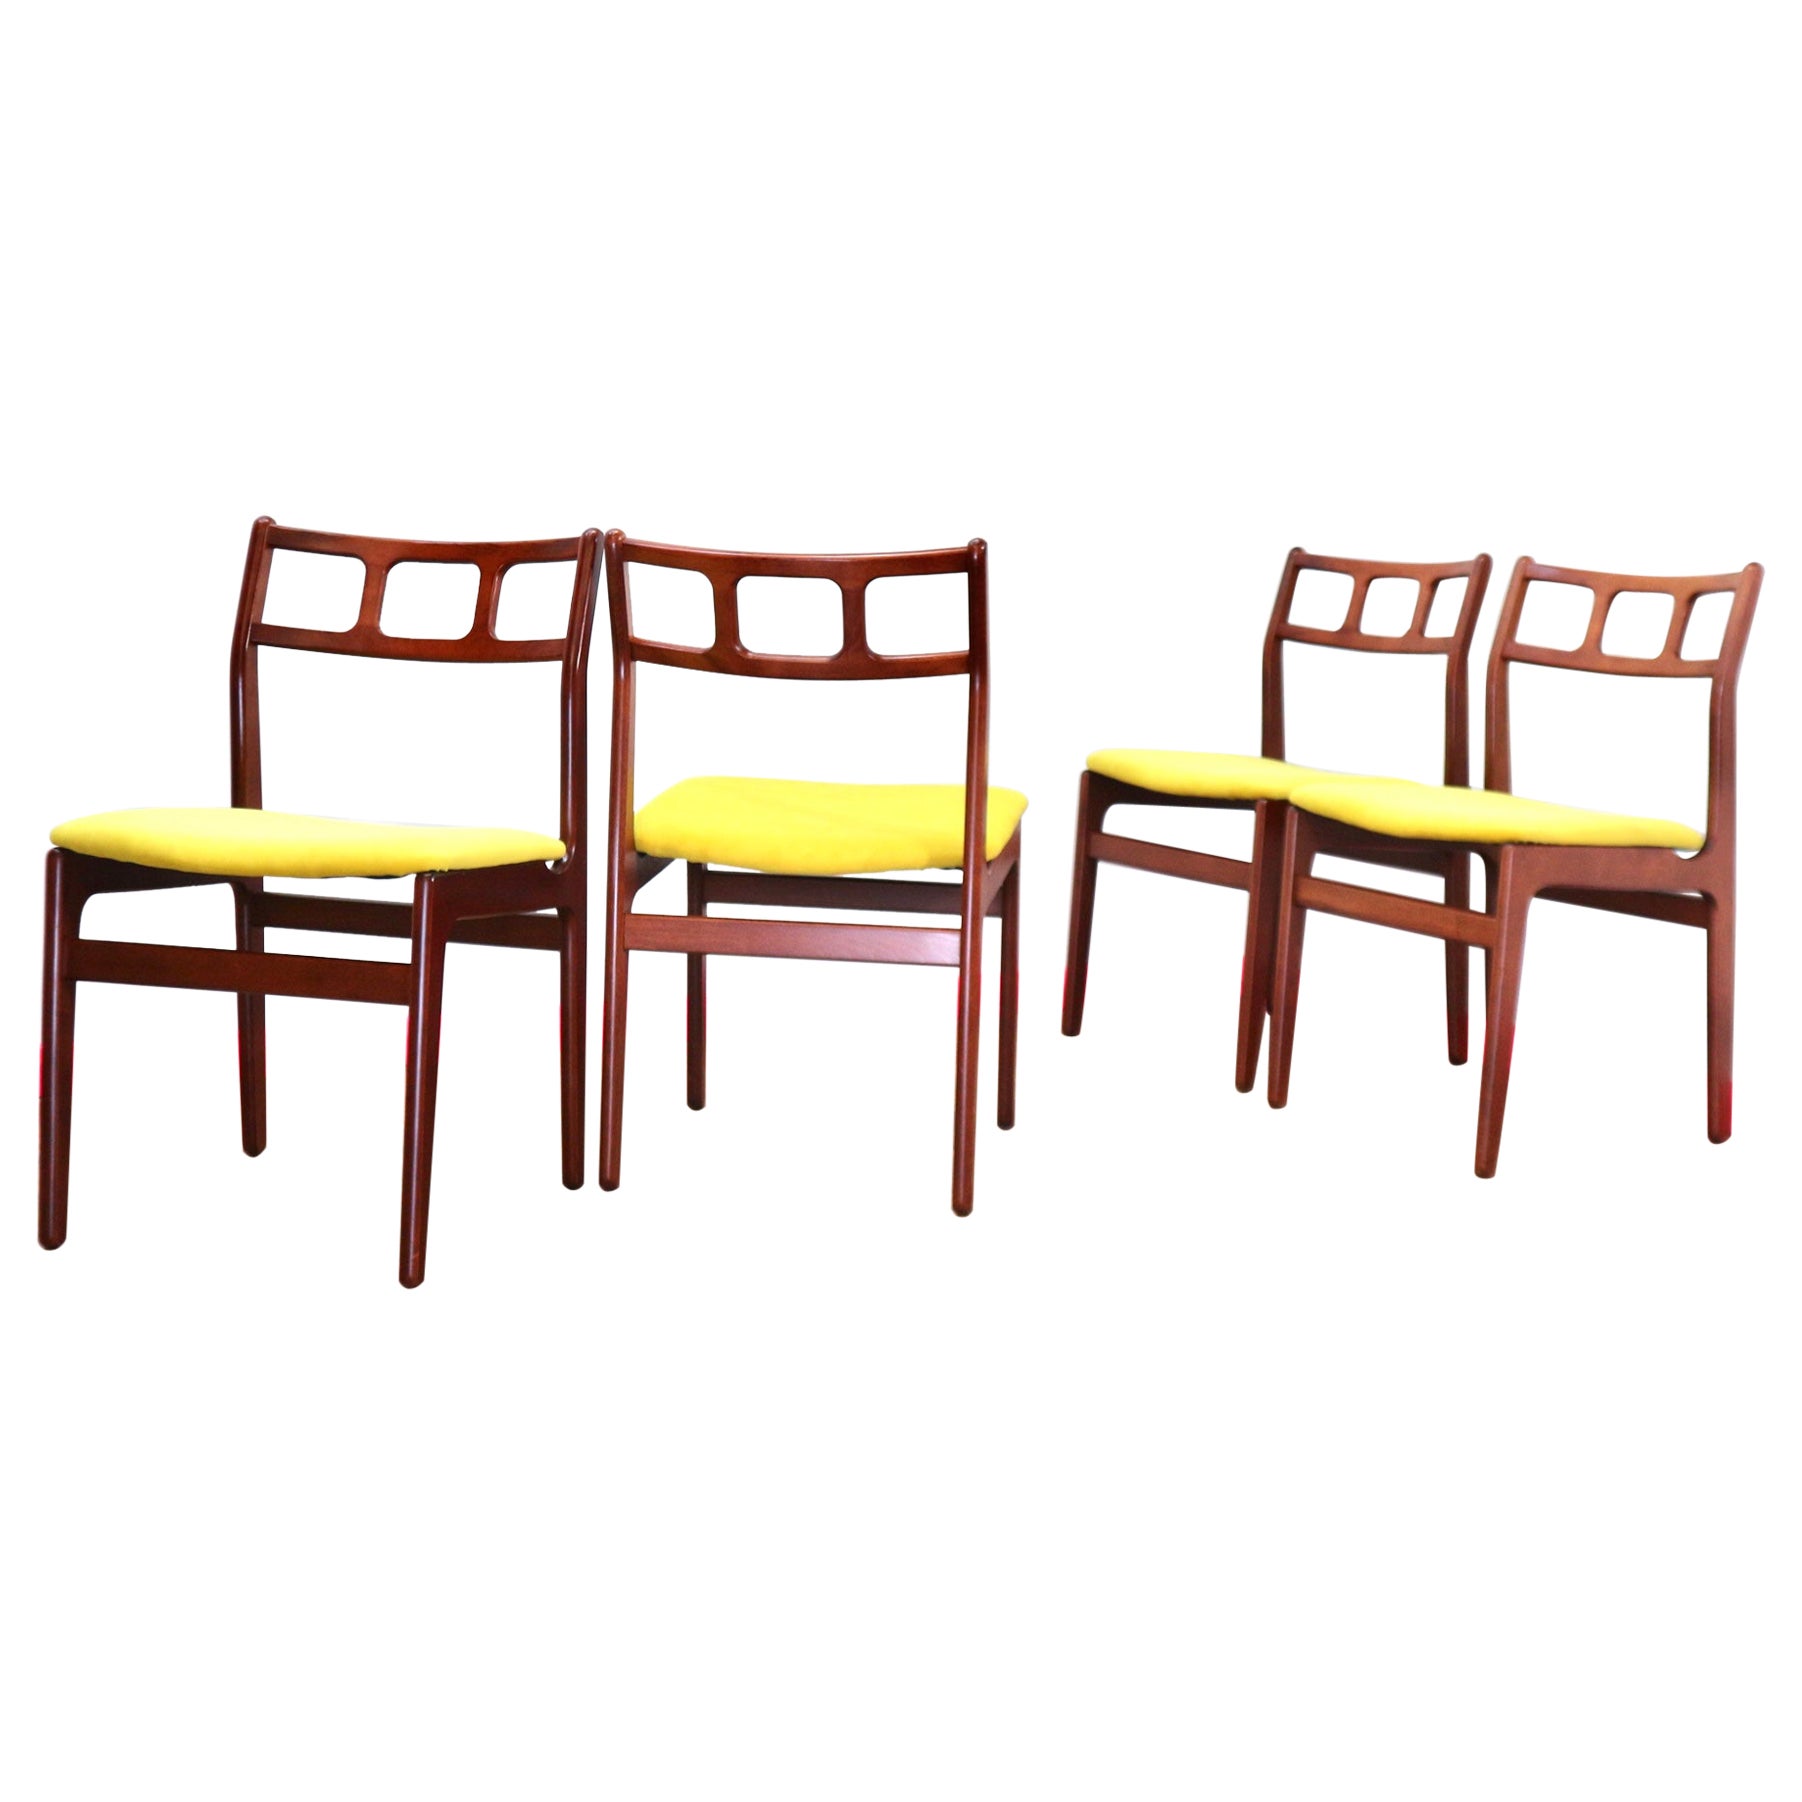 Mid-Century Modern Danish Design Dining Chairs by D, Scan Set of 4